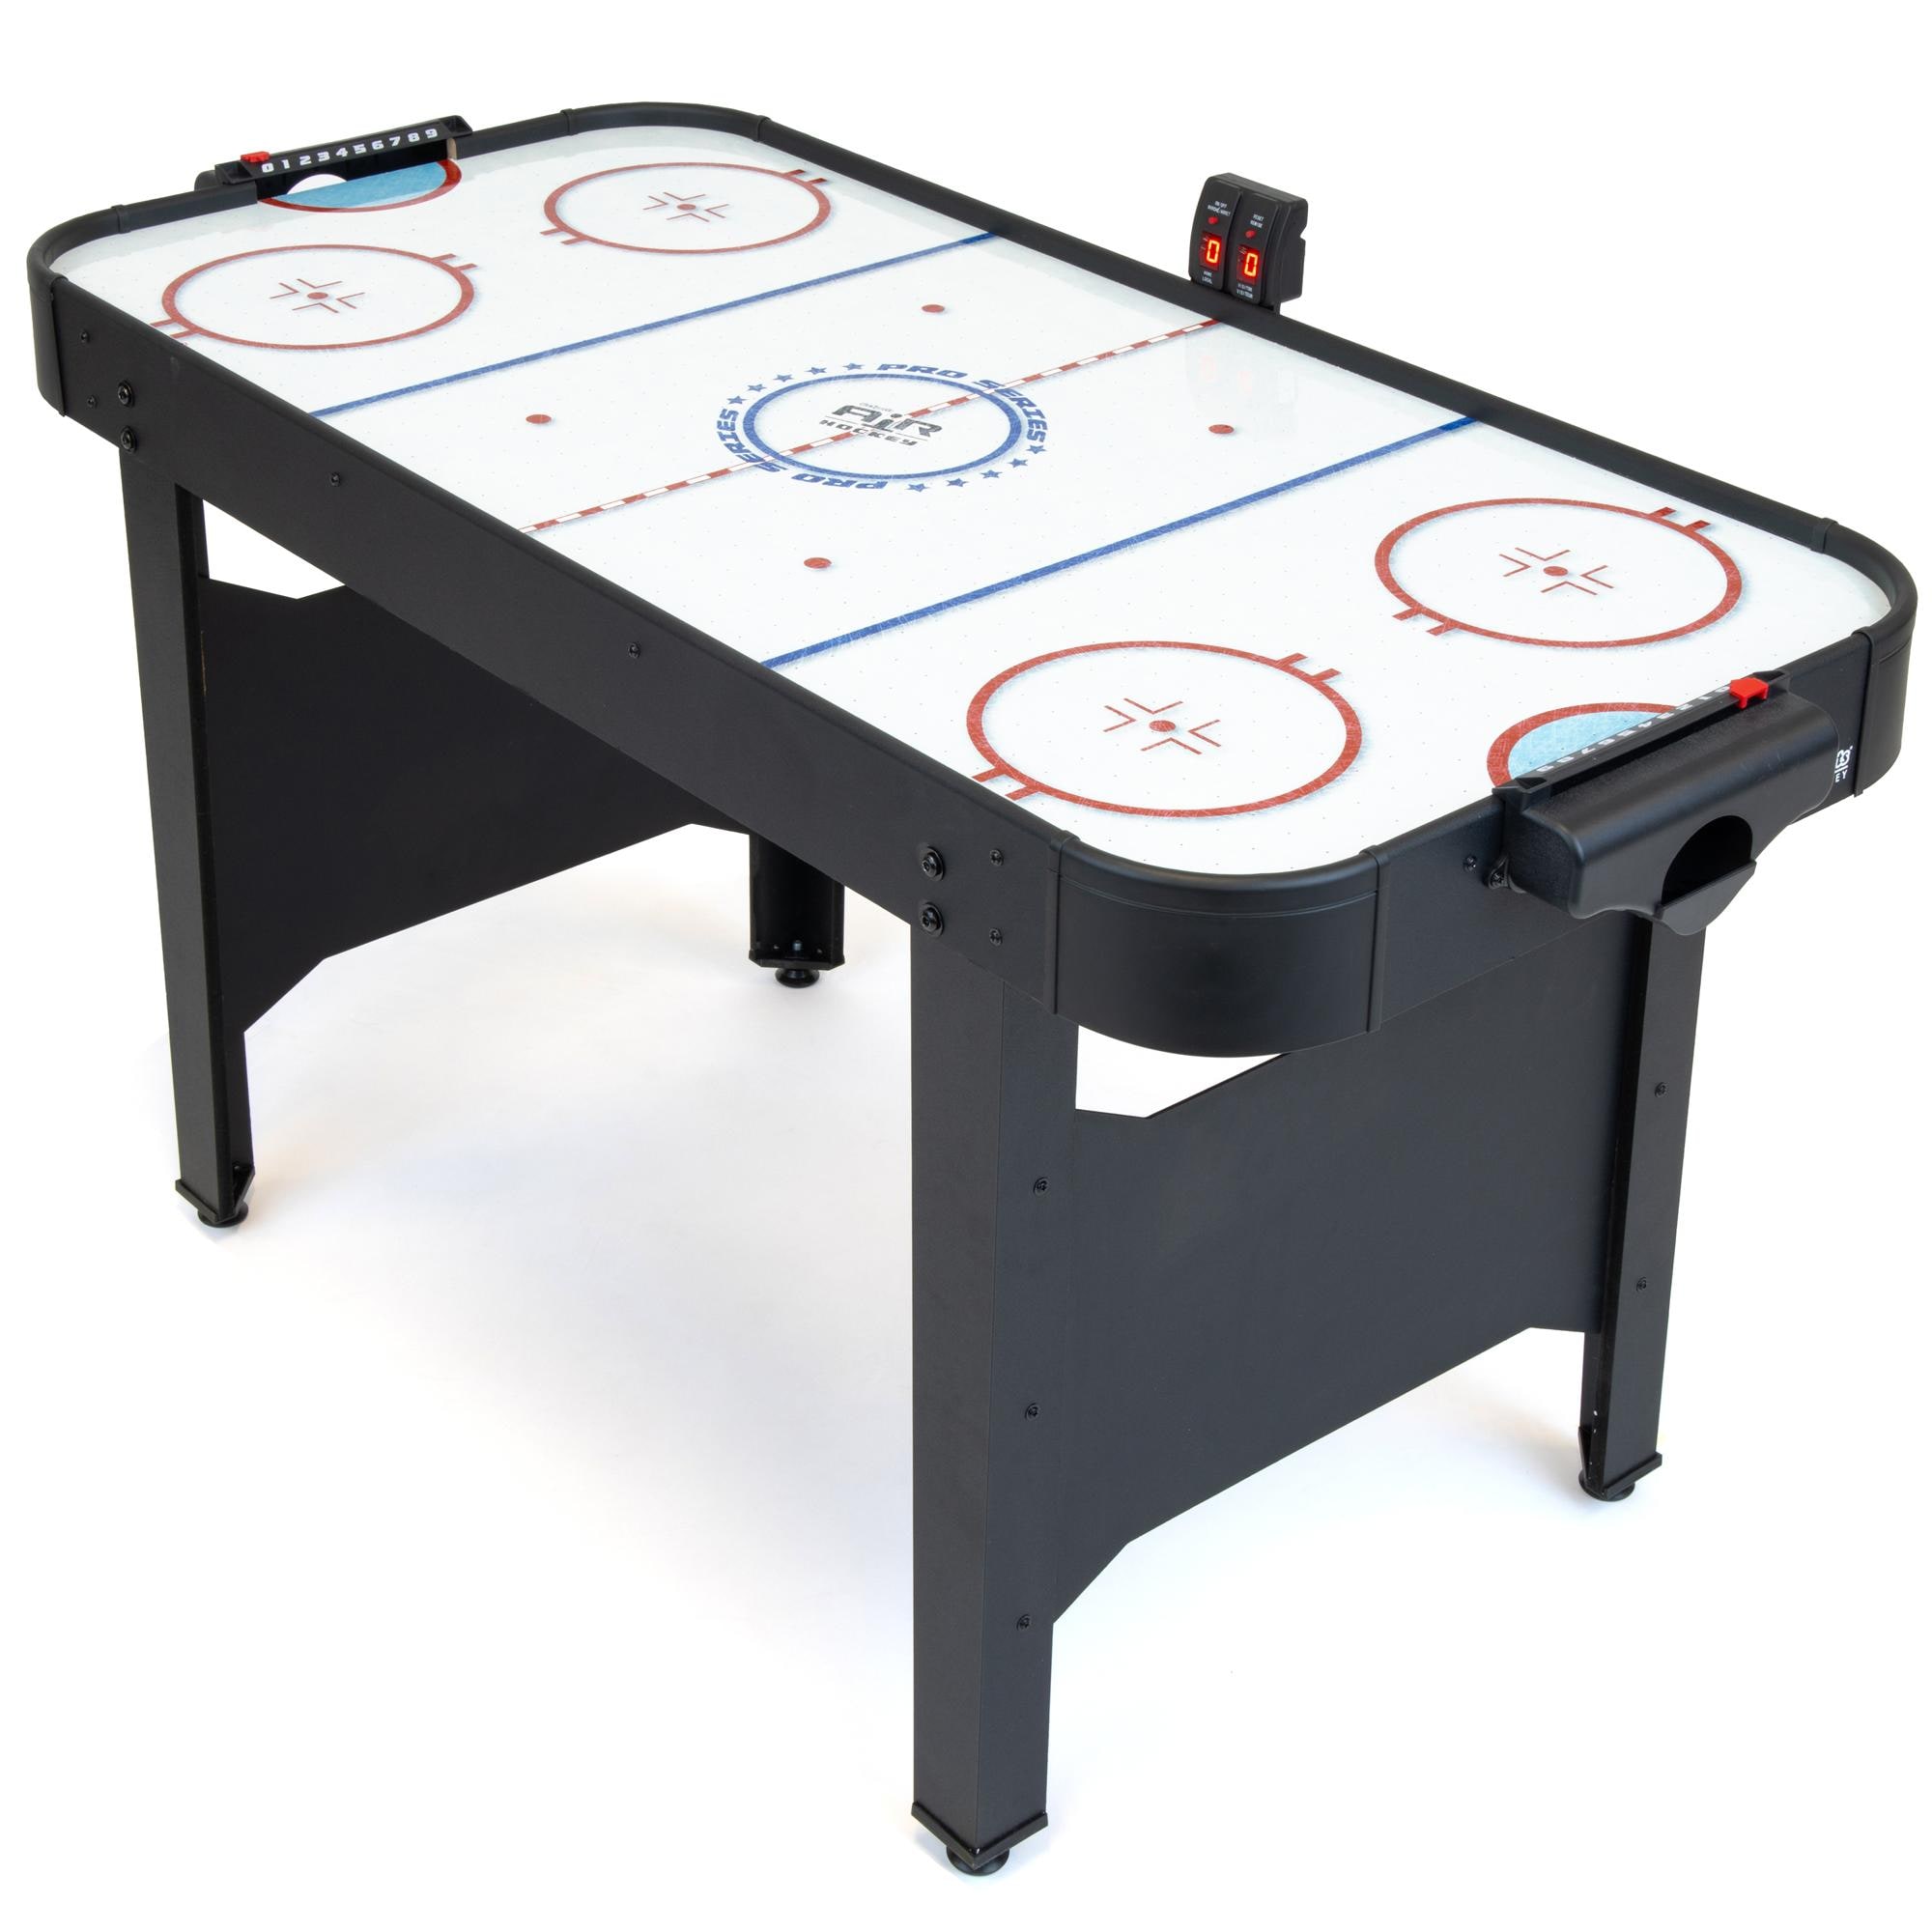 File:Air hockey table with puck and paddles.jpg - Wikimedia Commons